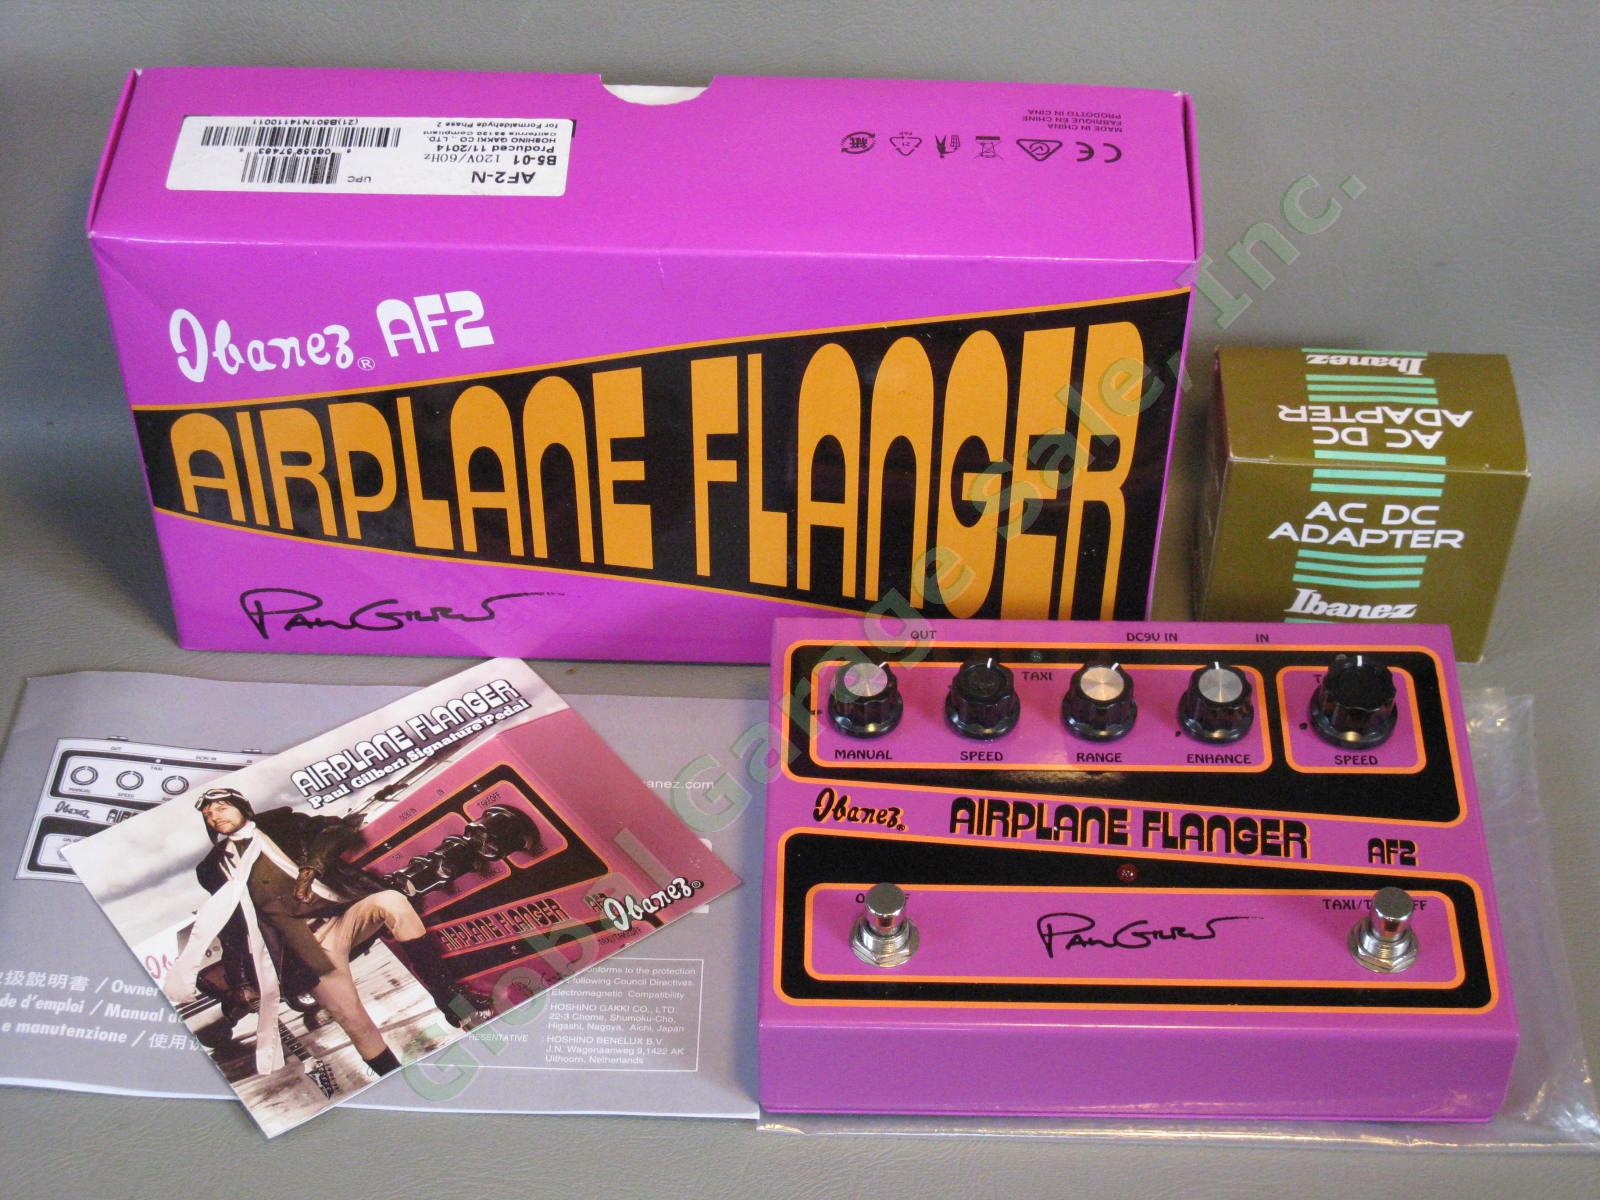 Ibanez Airplane Flanger AF2 Paul Gilbert Signature Chorus Guitar Effects Pedal